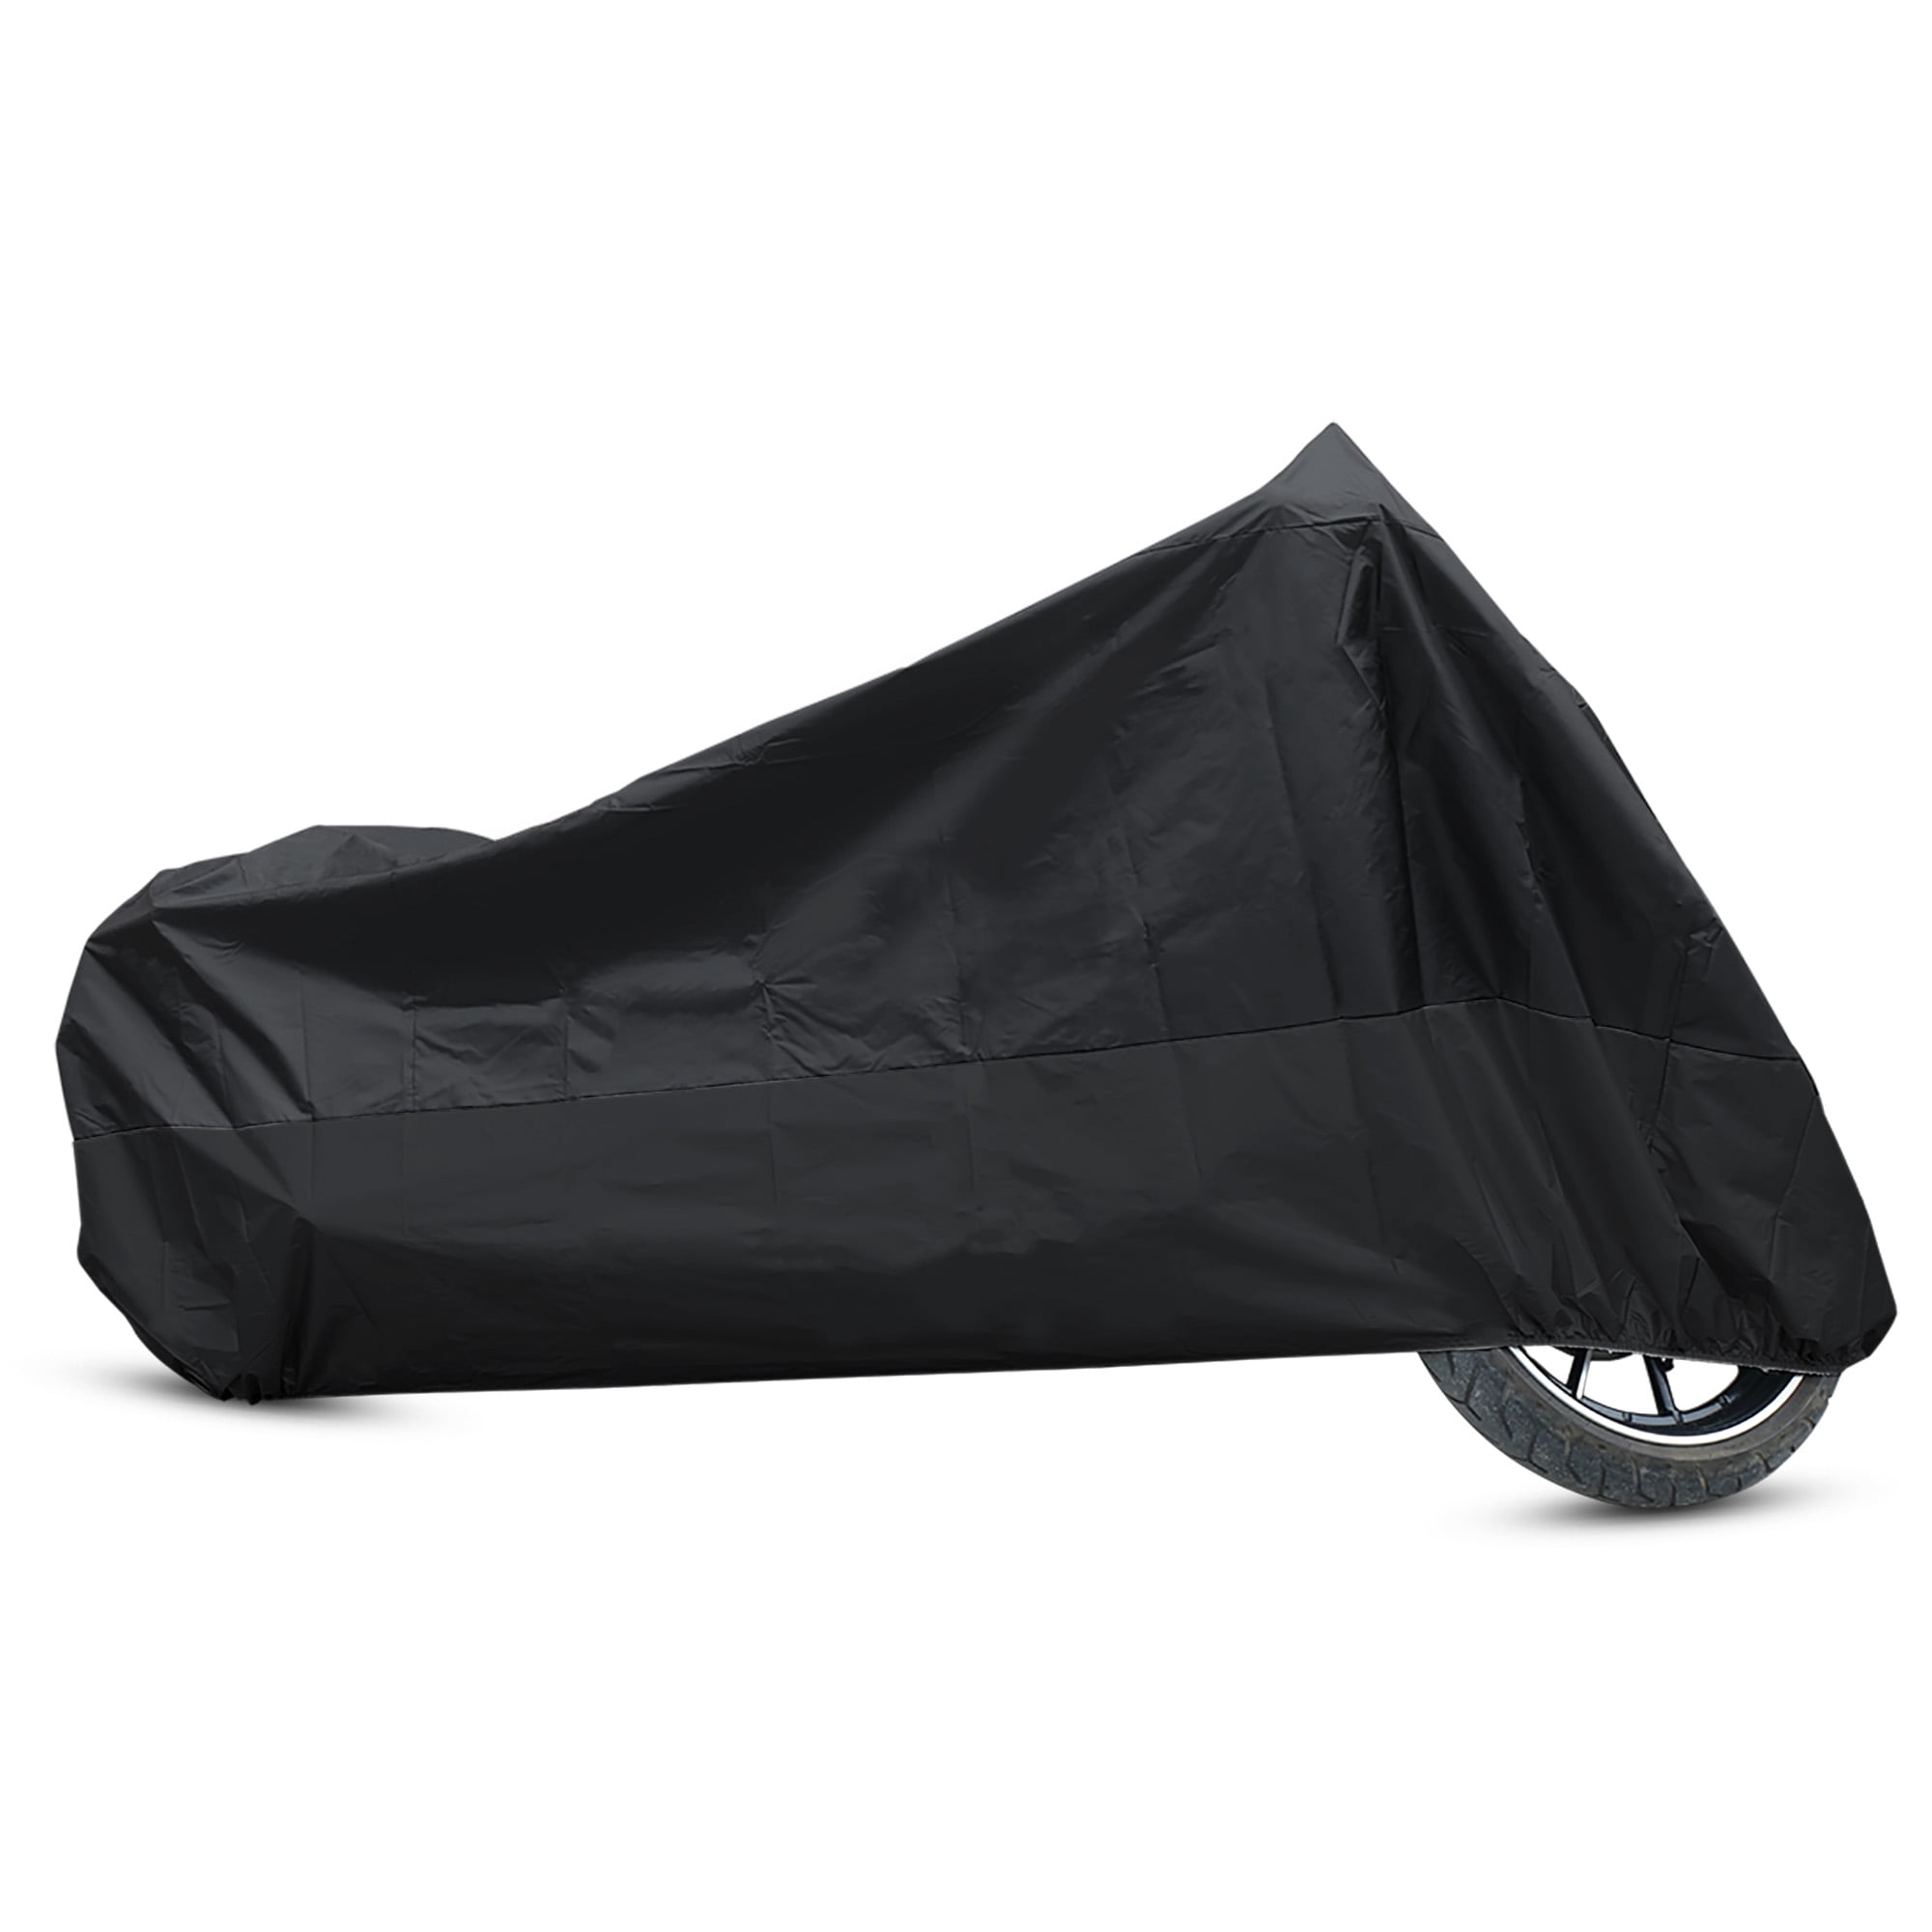 180T Motorcycle Cover Outdoor Protector Rain Dust UV Water Proof